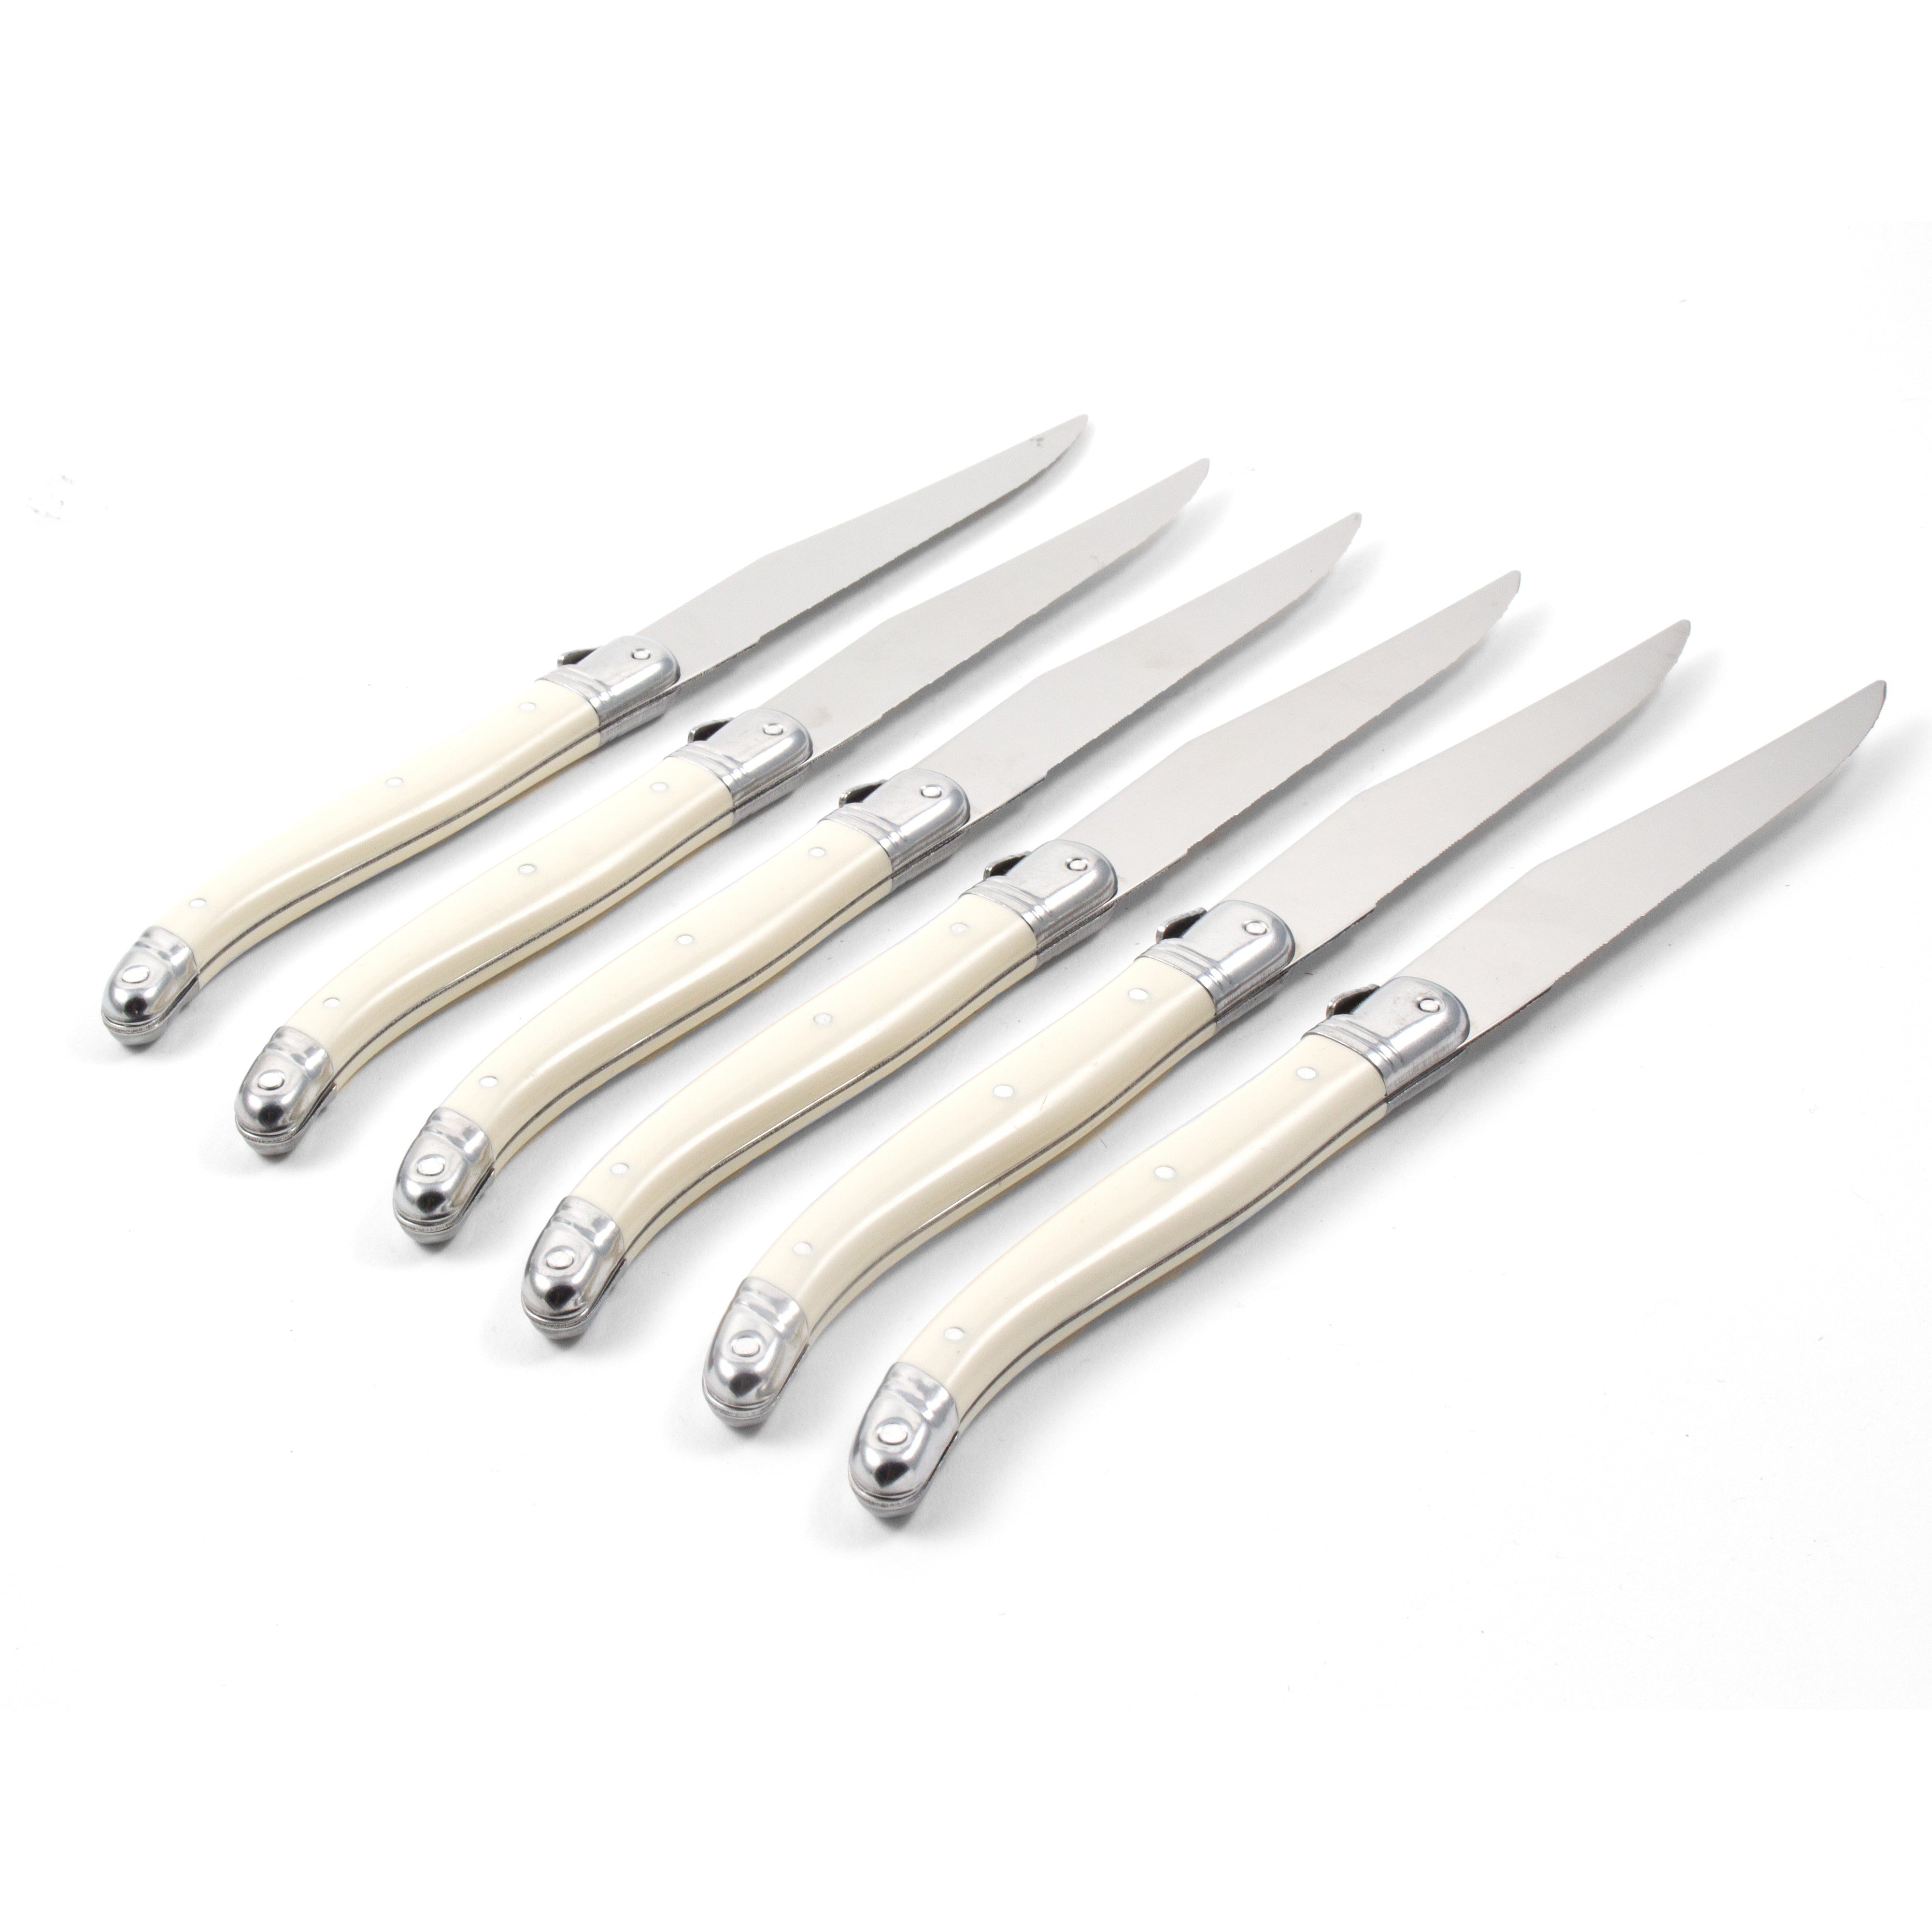 Laguiole Ivory Knives in Wooden Box with Acrylic Lid (Set of 6) Cutlery Laguiole Brand_Laguiole Kitchen_Dinnerware Kitchen_Kitchenware Knife Sets Laguiole Spring Collection Laguiole_Knives_S_6_-_White_out_of_box